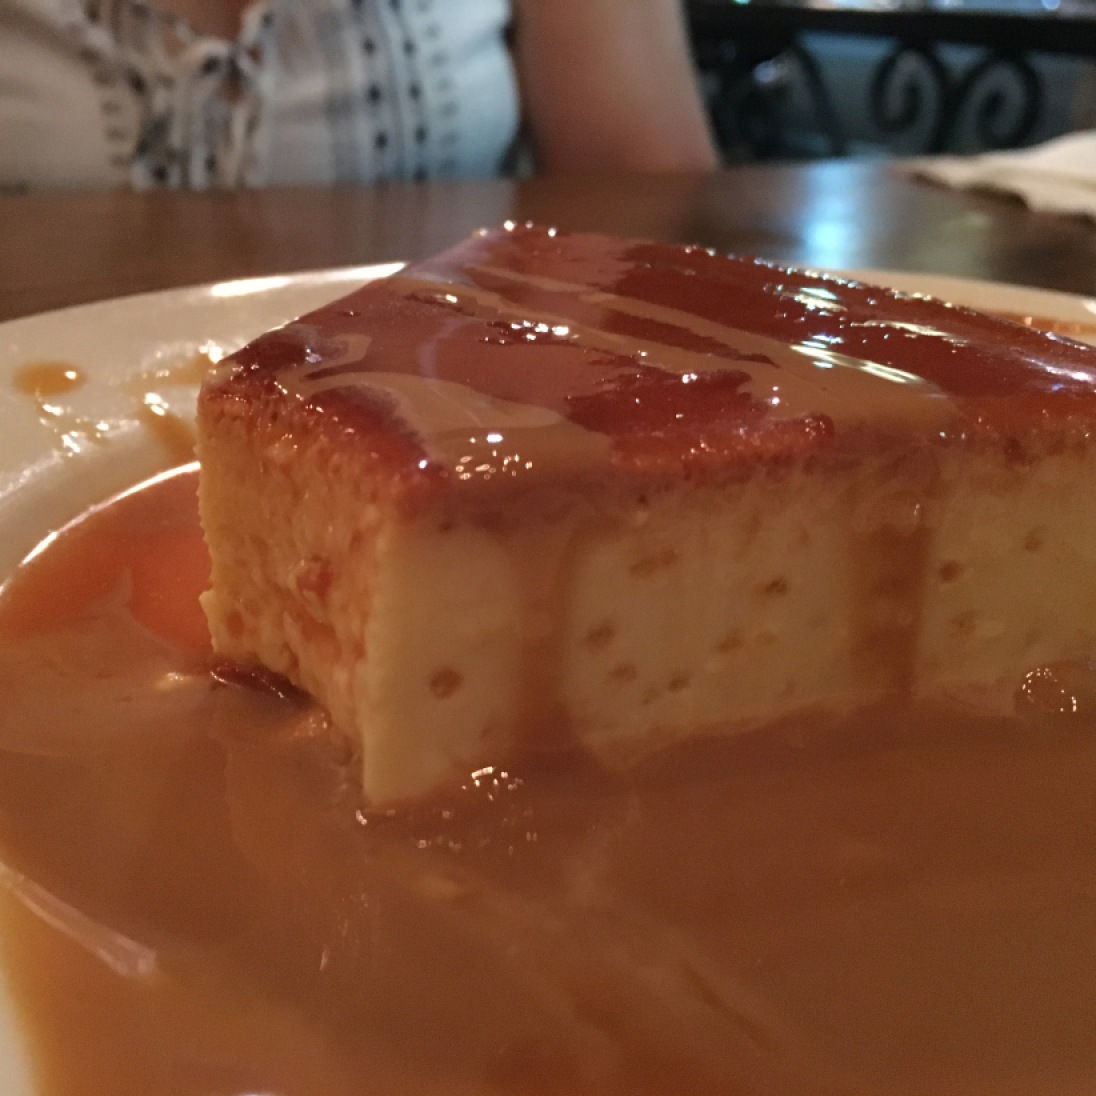 The meal ended with flan, but not just any flan. Dulce de leche flan.